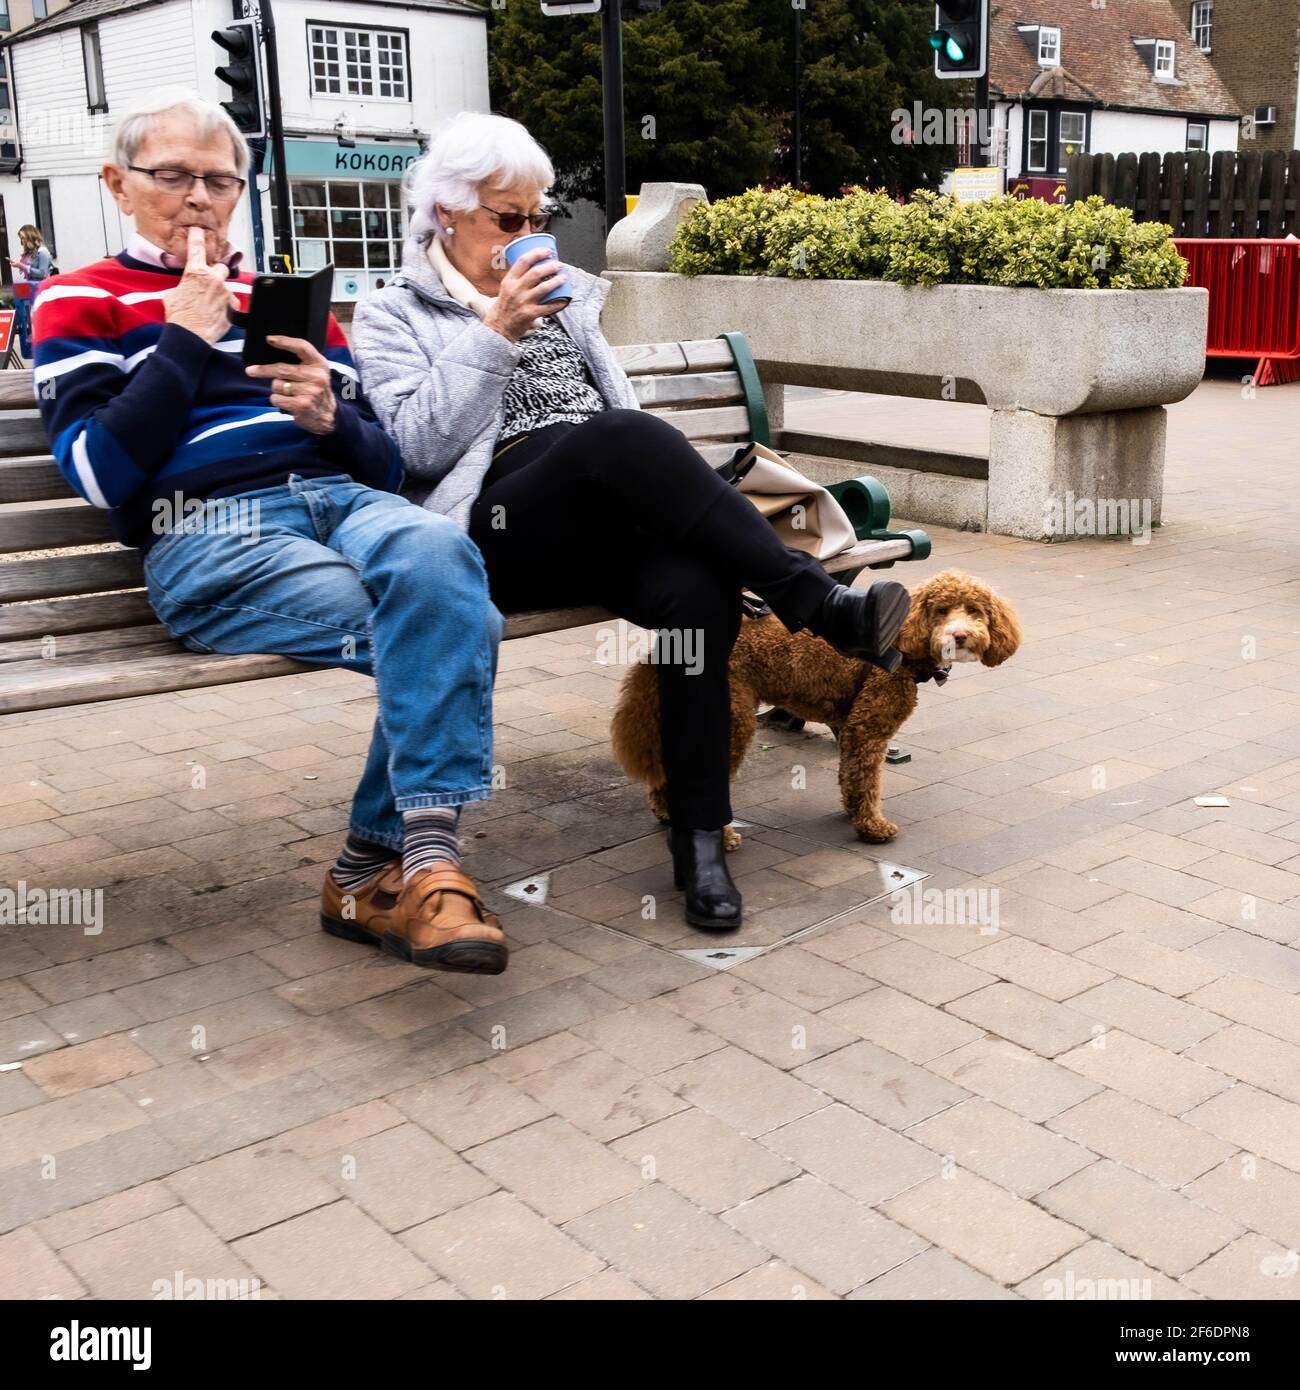 Epsom Surrey London UK, March 31 2021, Senior Man Woman Couple Sitting On An Outdoor Seat Or Bench Relaxing With Coffee Stock Photo